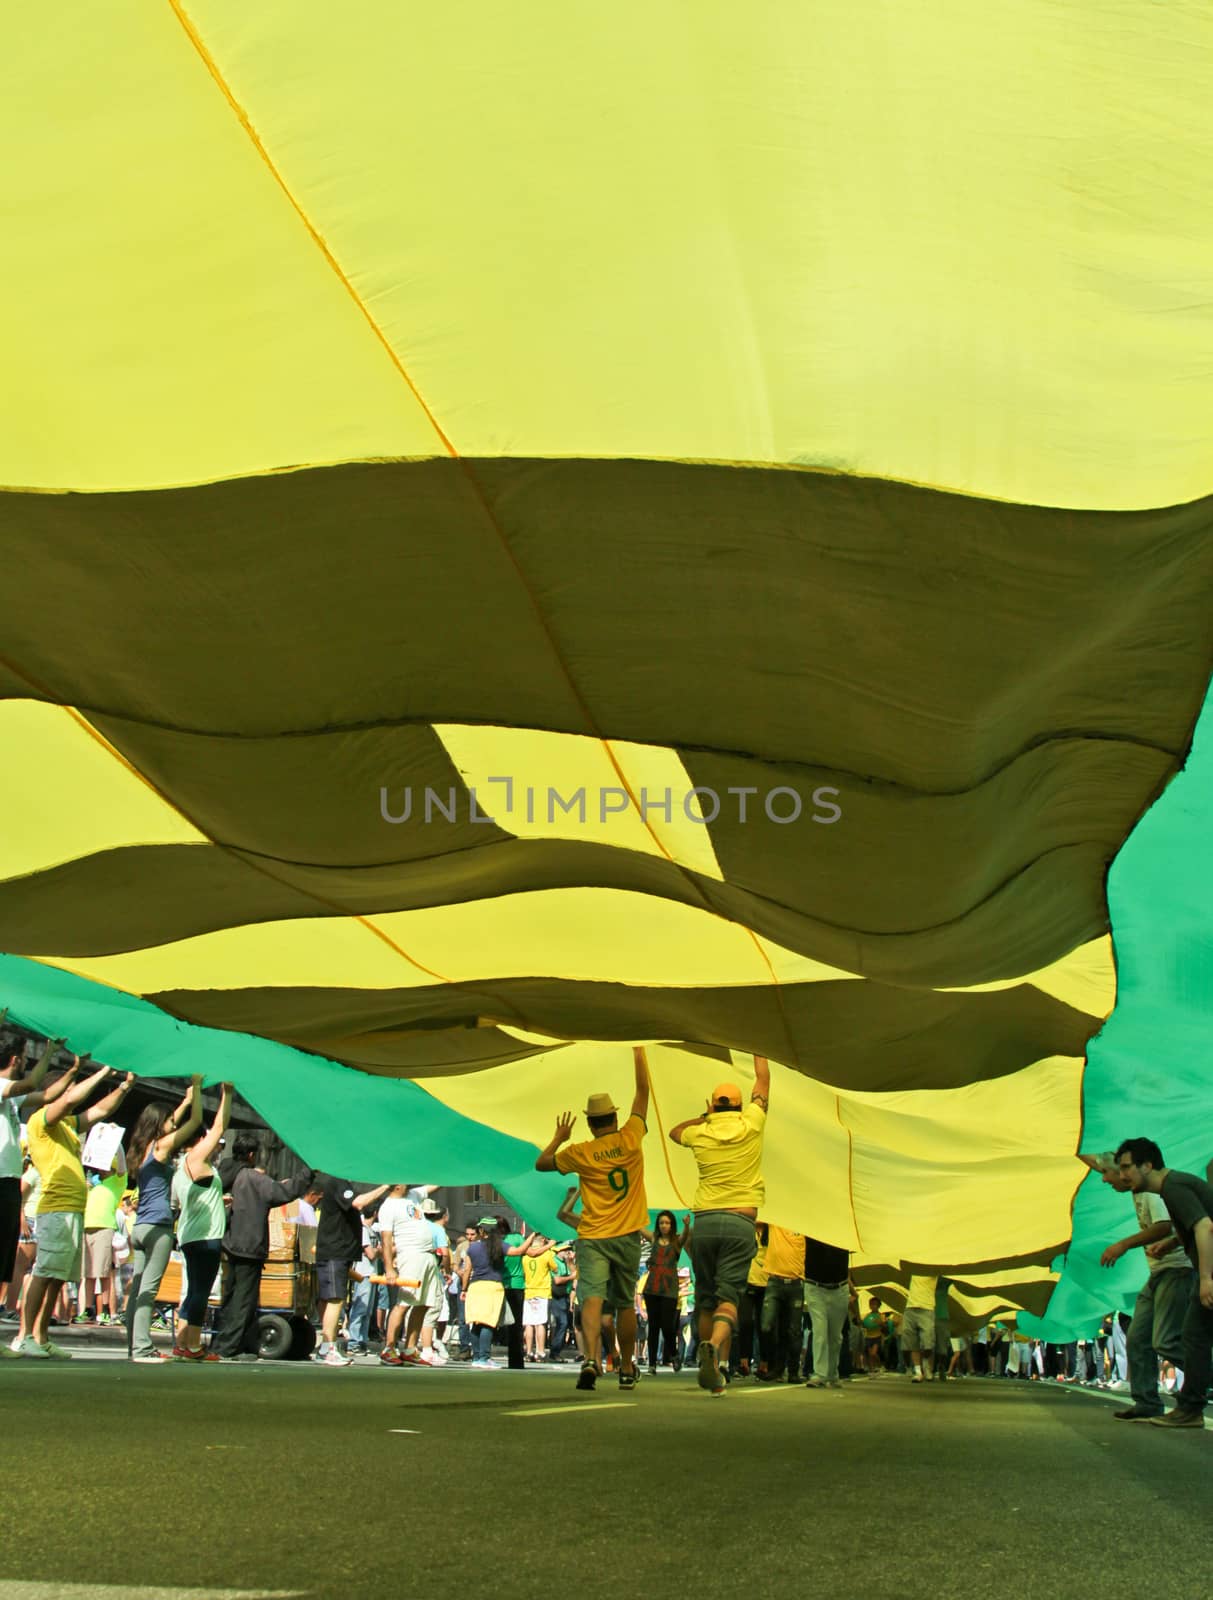 SAO PAULO, BRAZIL August 16, 2015: An unidentified group of people hold a big flag in the protest against federal government corruption in Sao Paulo Brazil. Protesters call for the impeachment of President Dilma Rousseff.